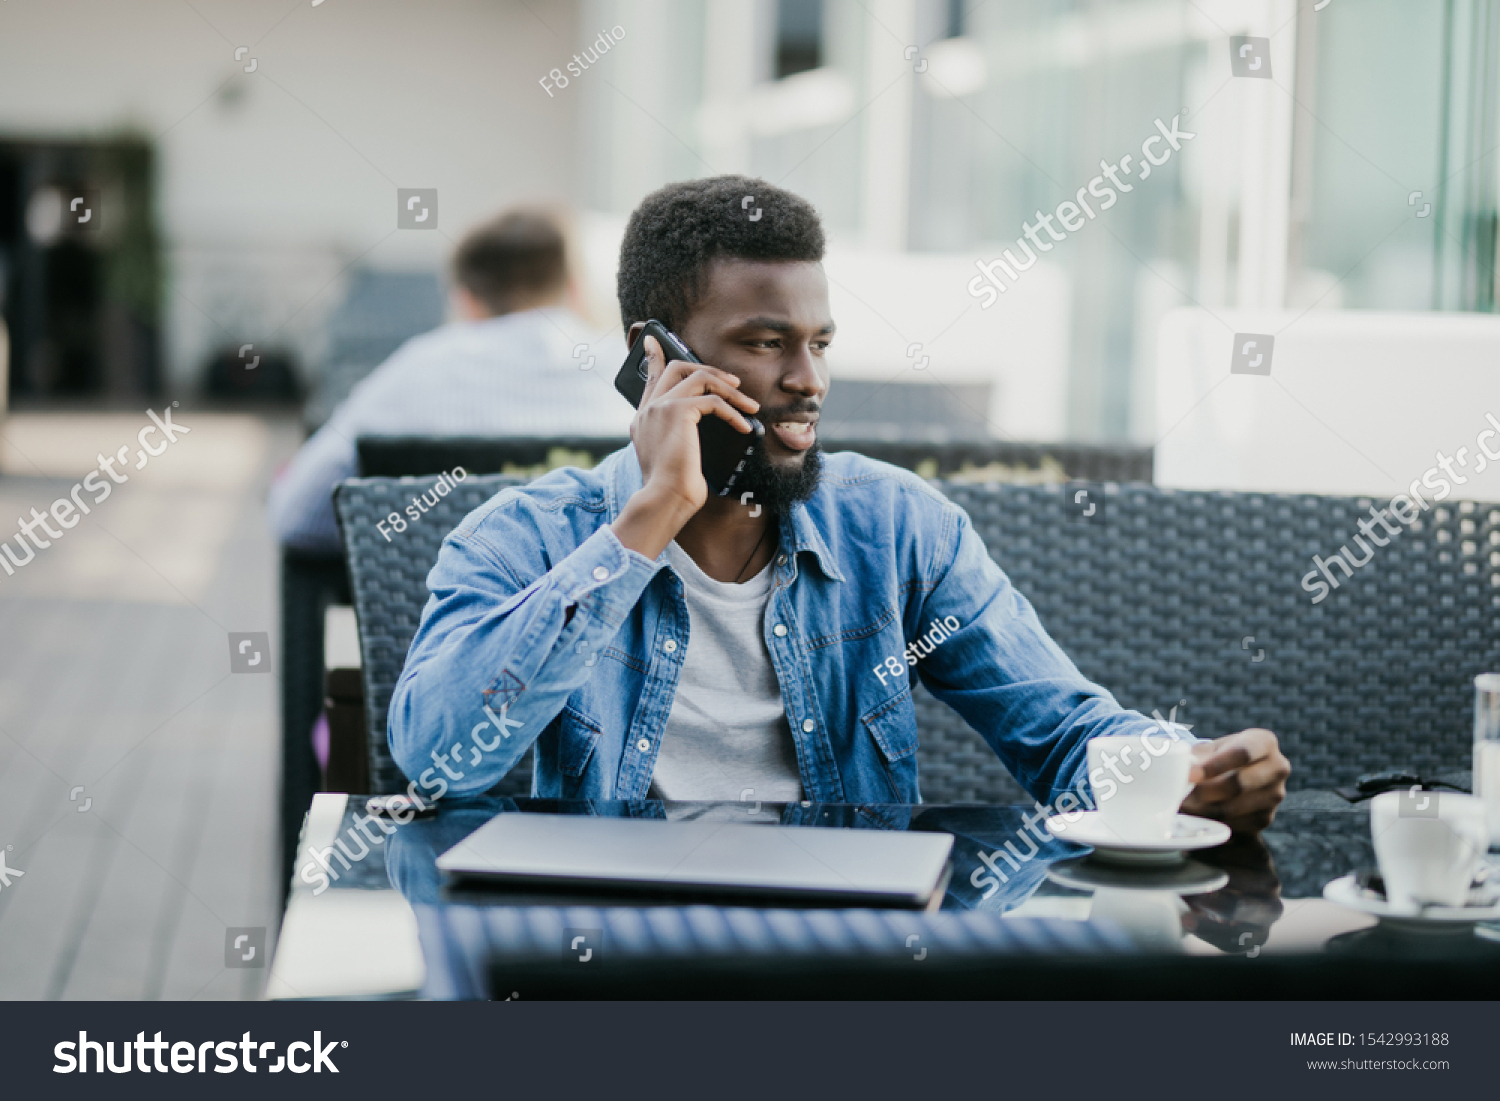 Smiling young african man drinking coffee and talking on mobile phone while sitting in cafe, view through the window #1542993188